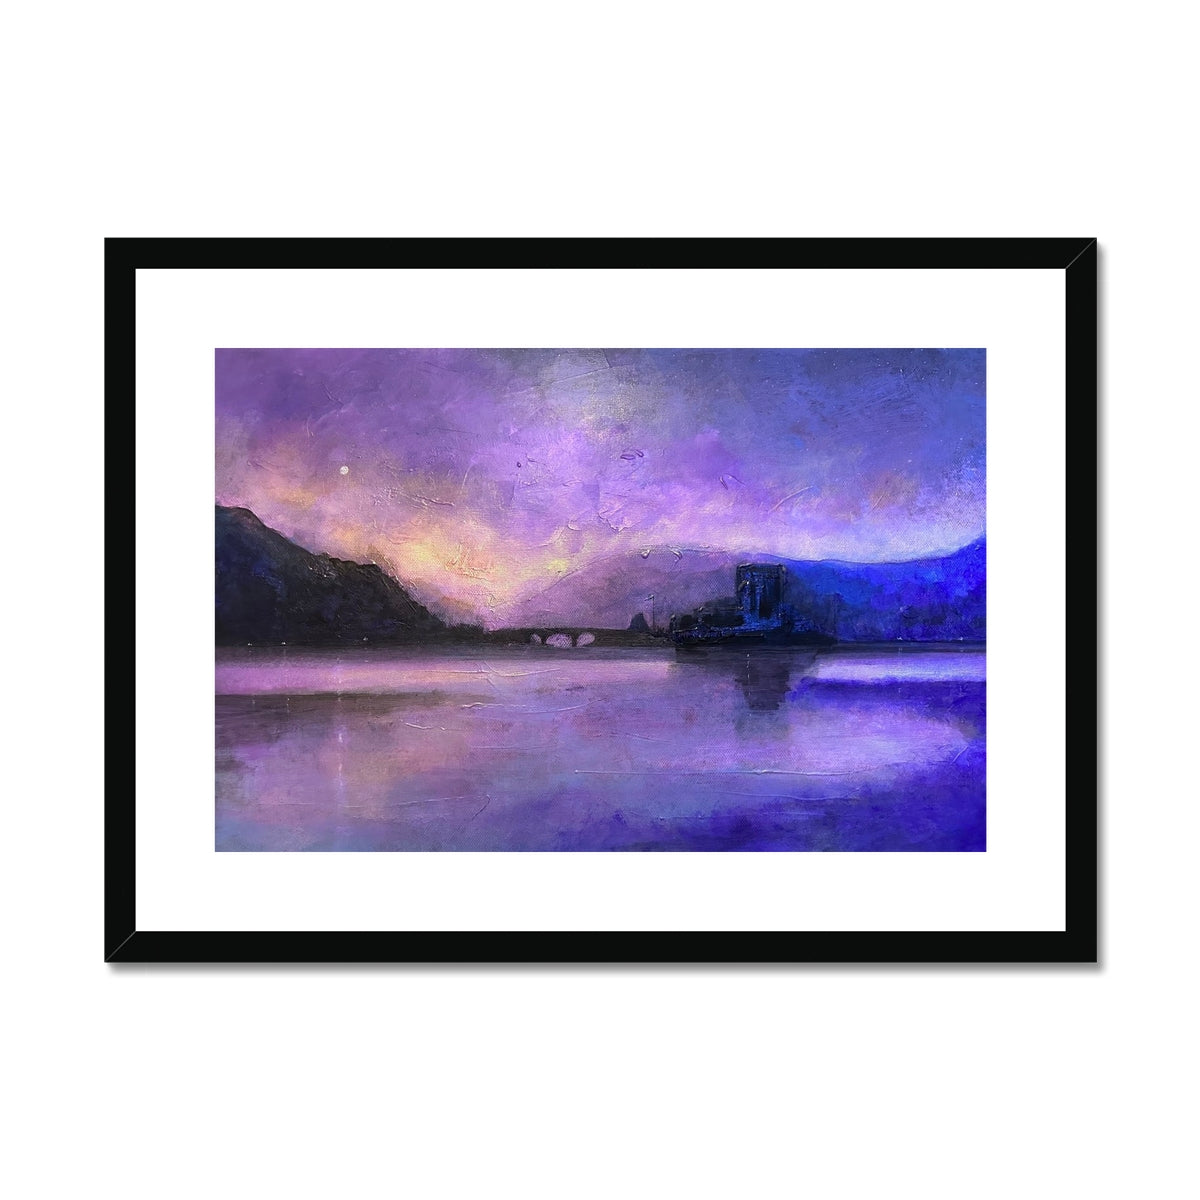 Eilean Donan Castle Moonset Painting | Framed & Mounted Prints From Scotland-Framed & Mounted Prints-Historic & Iconic Scotland Art Gallery-A2 Landscape-Black Frame-Paintings, Prints, Homeware, Art Gifts From Scotland By Scottish Artist Kevin Hunter